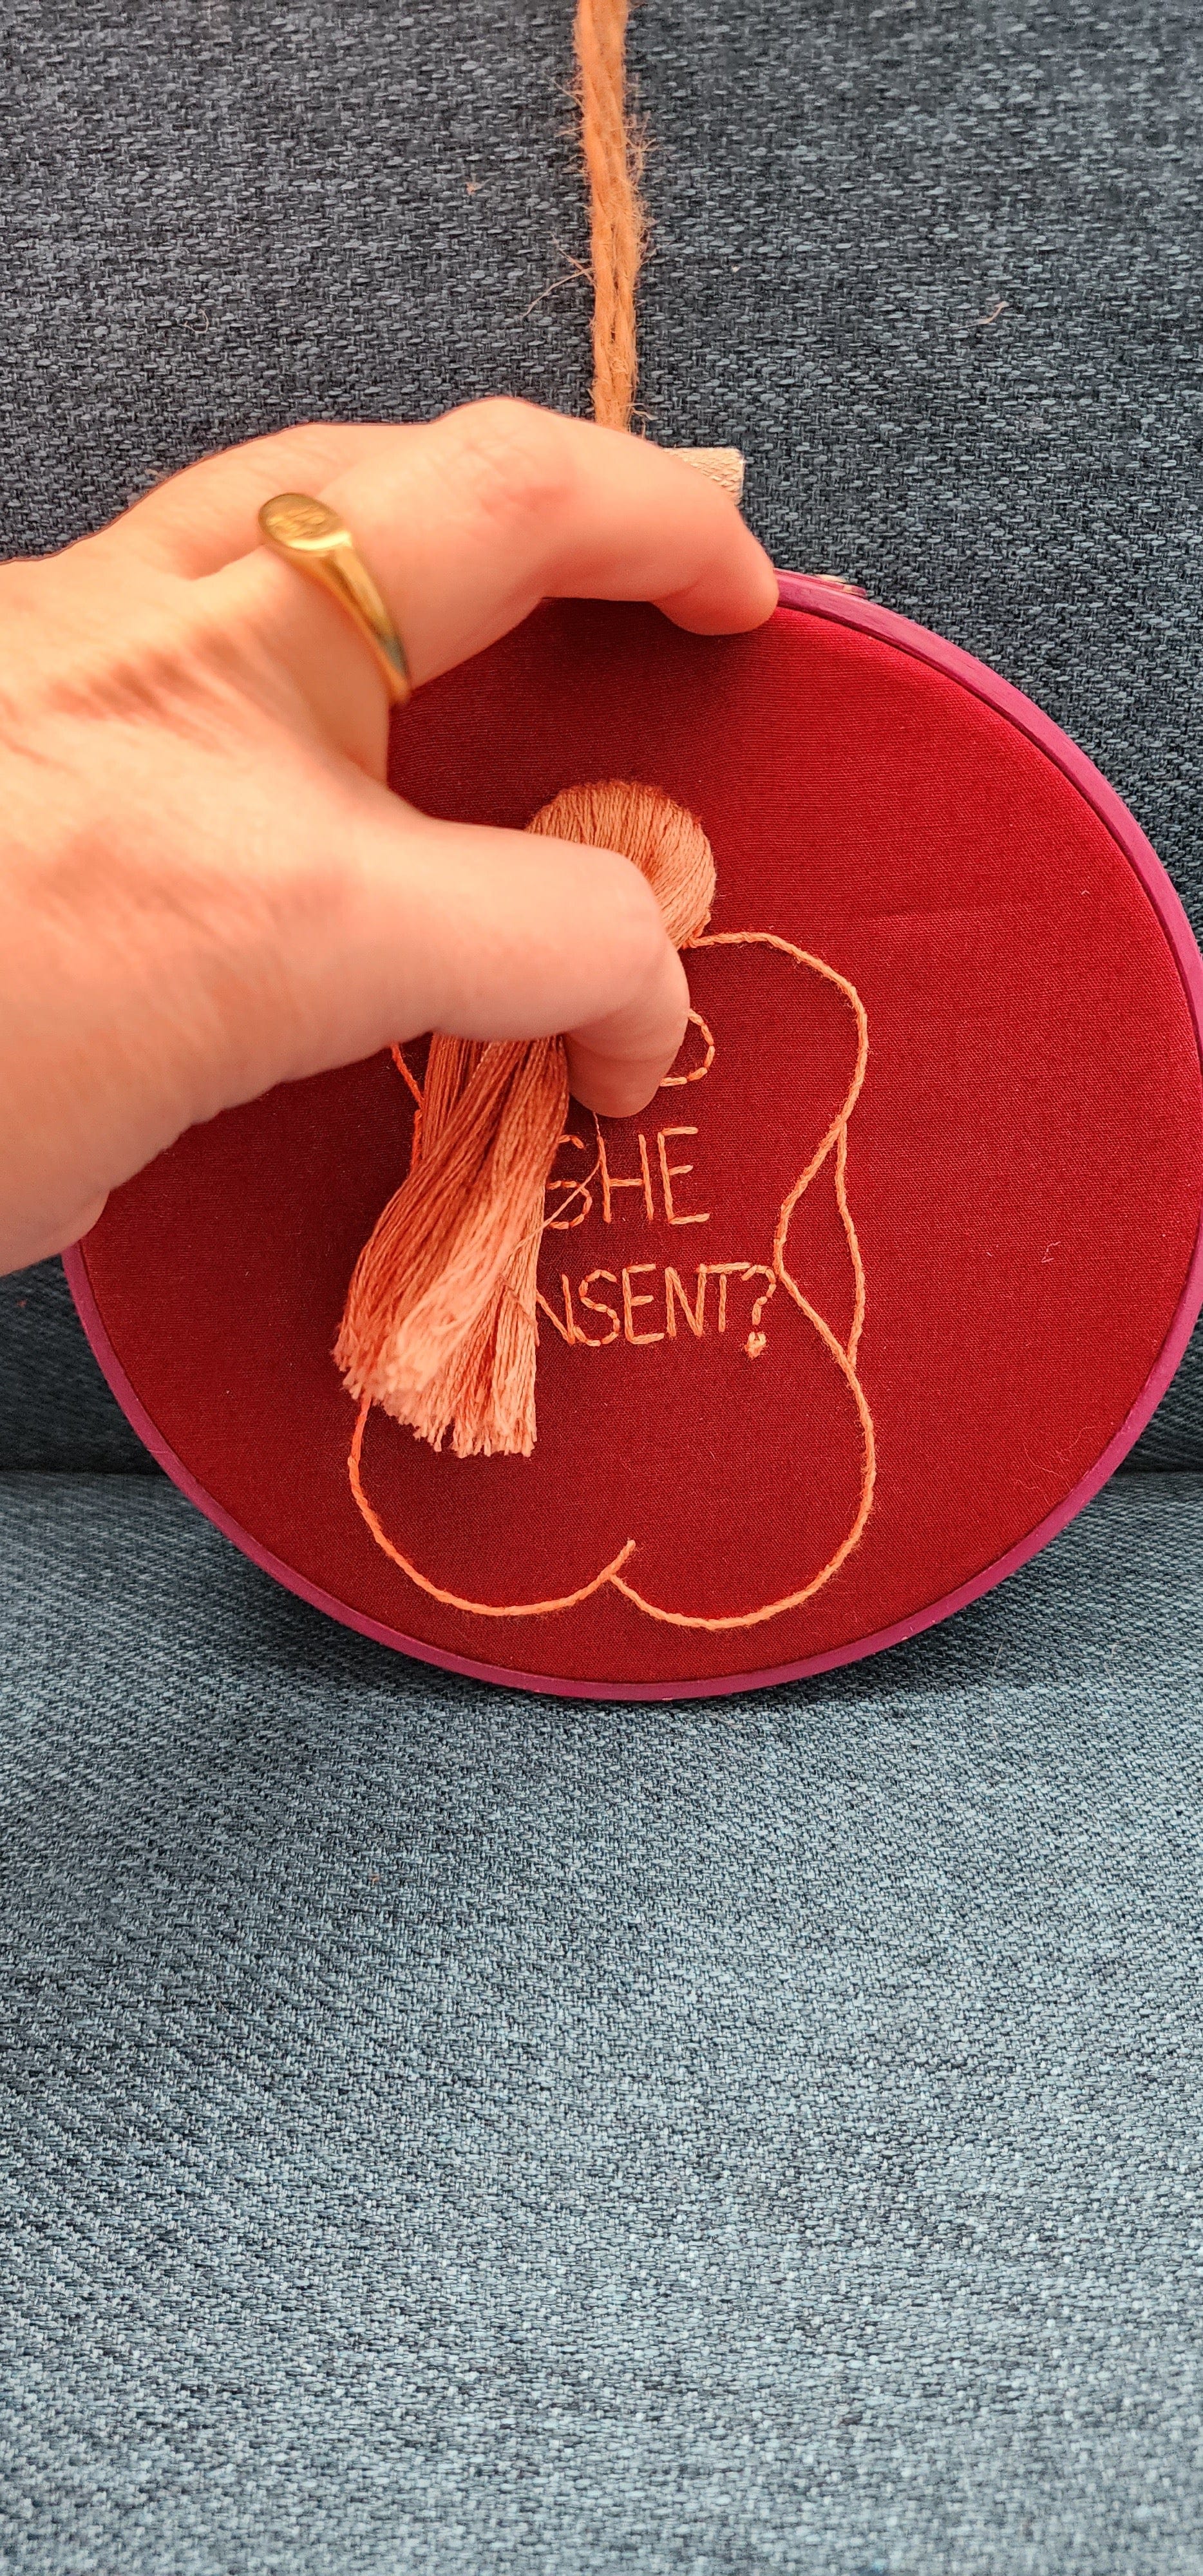 Embrace Embroidery "Did She Consent?"